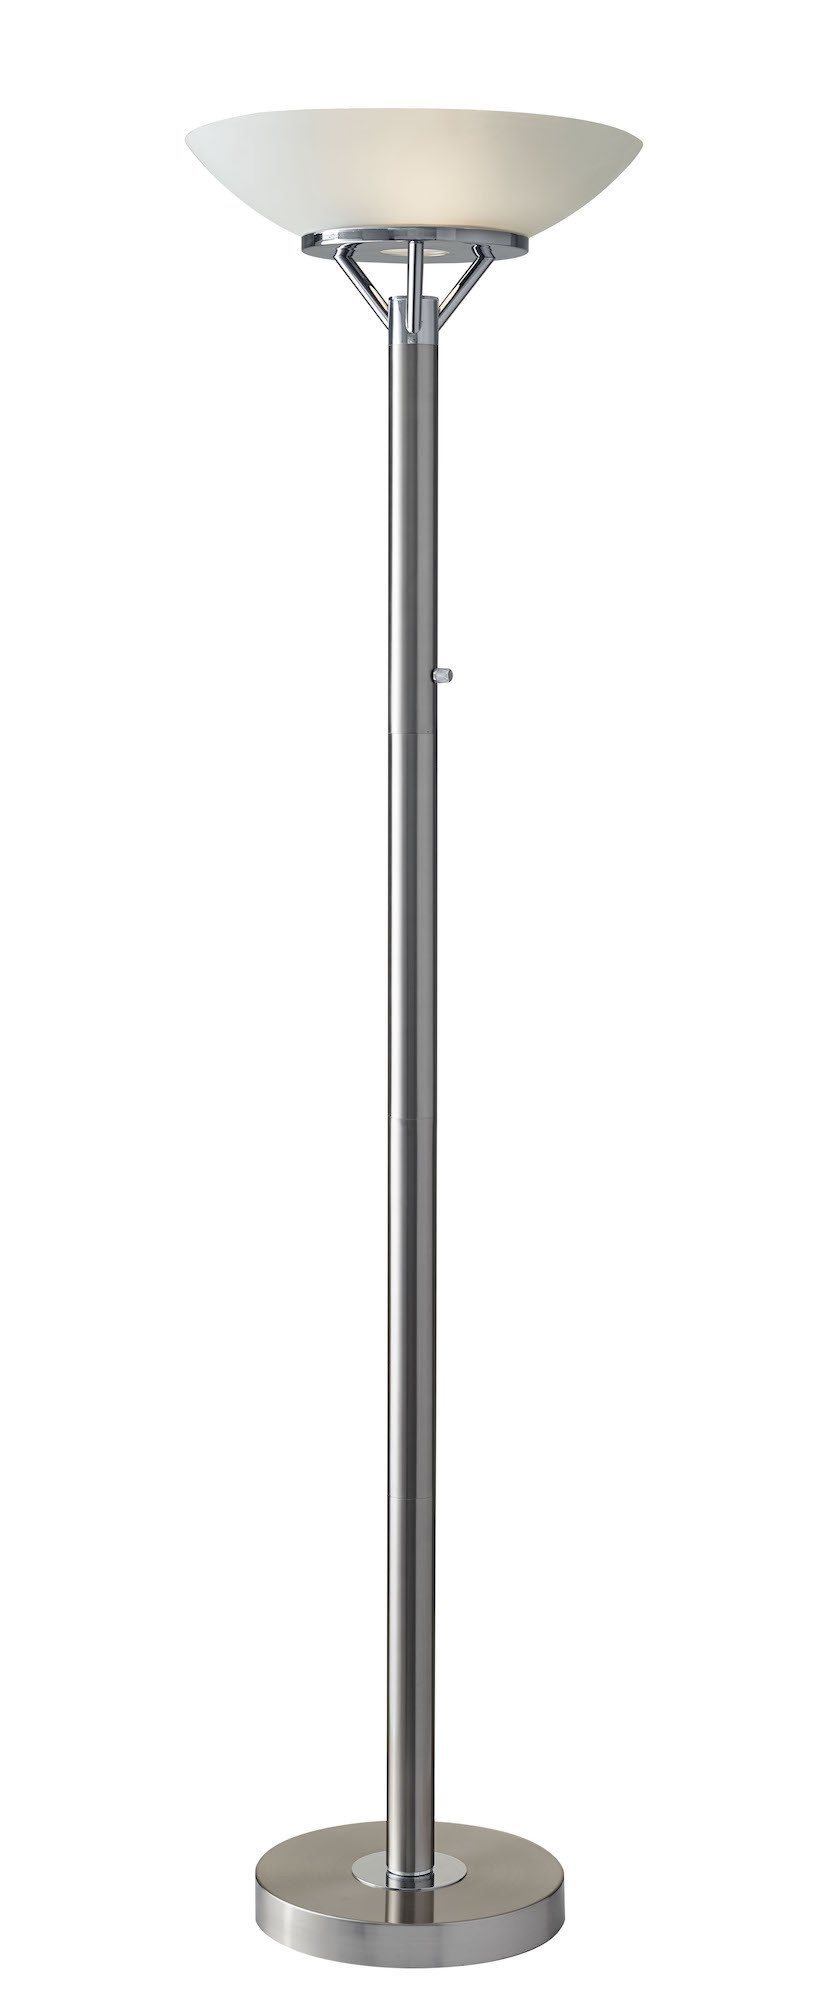 Expo Floor Lamp Lamps Adesso Brushed Steel 